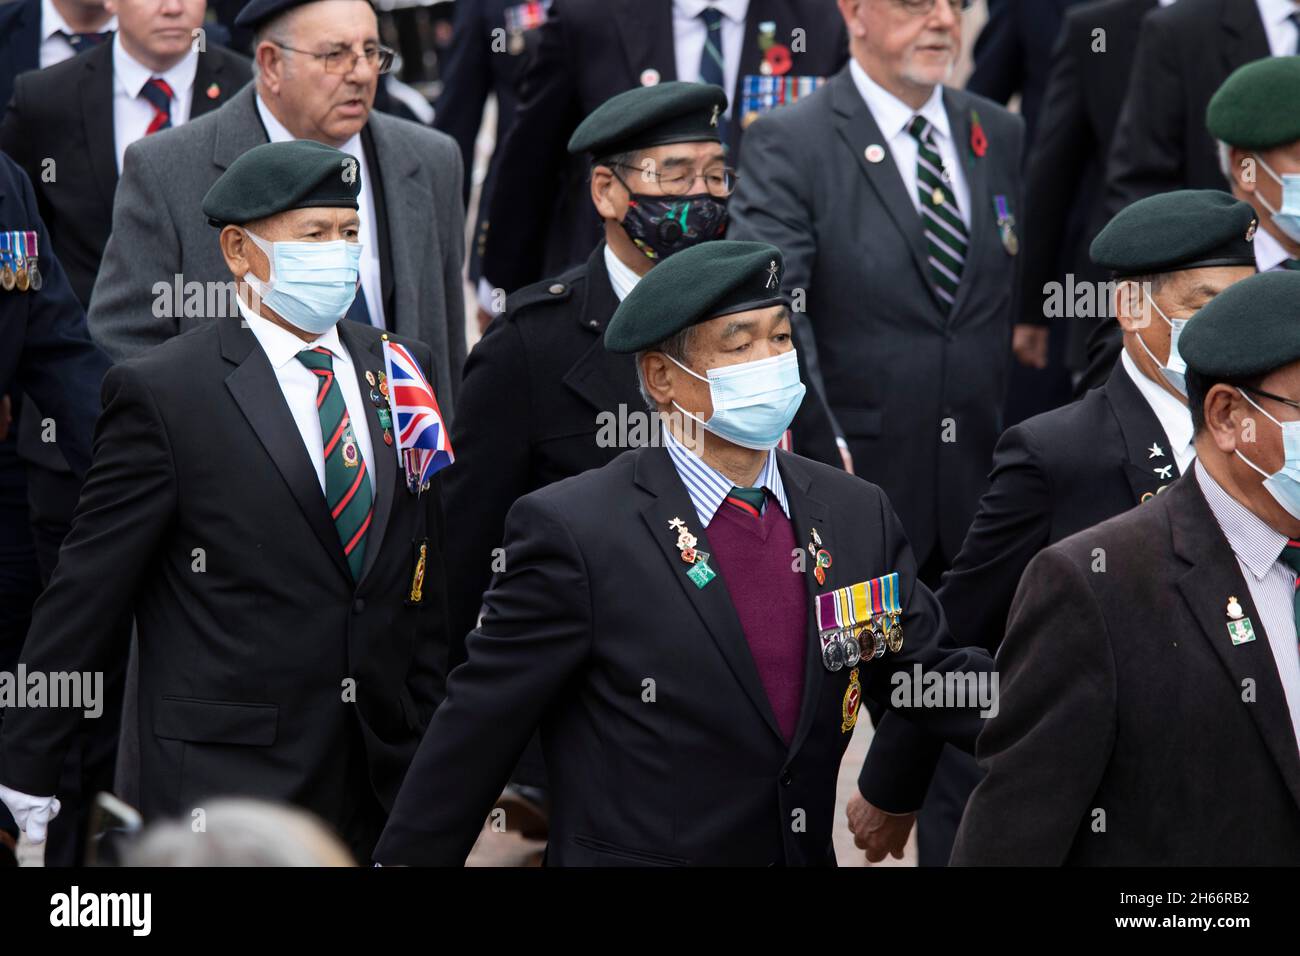 The 100th Bedworth armistice parade taking place on November 11th 2021. Pictured Gurkhas taking part in the parade. Stock Photo